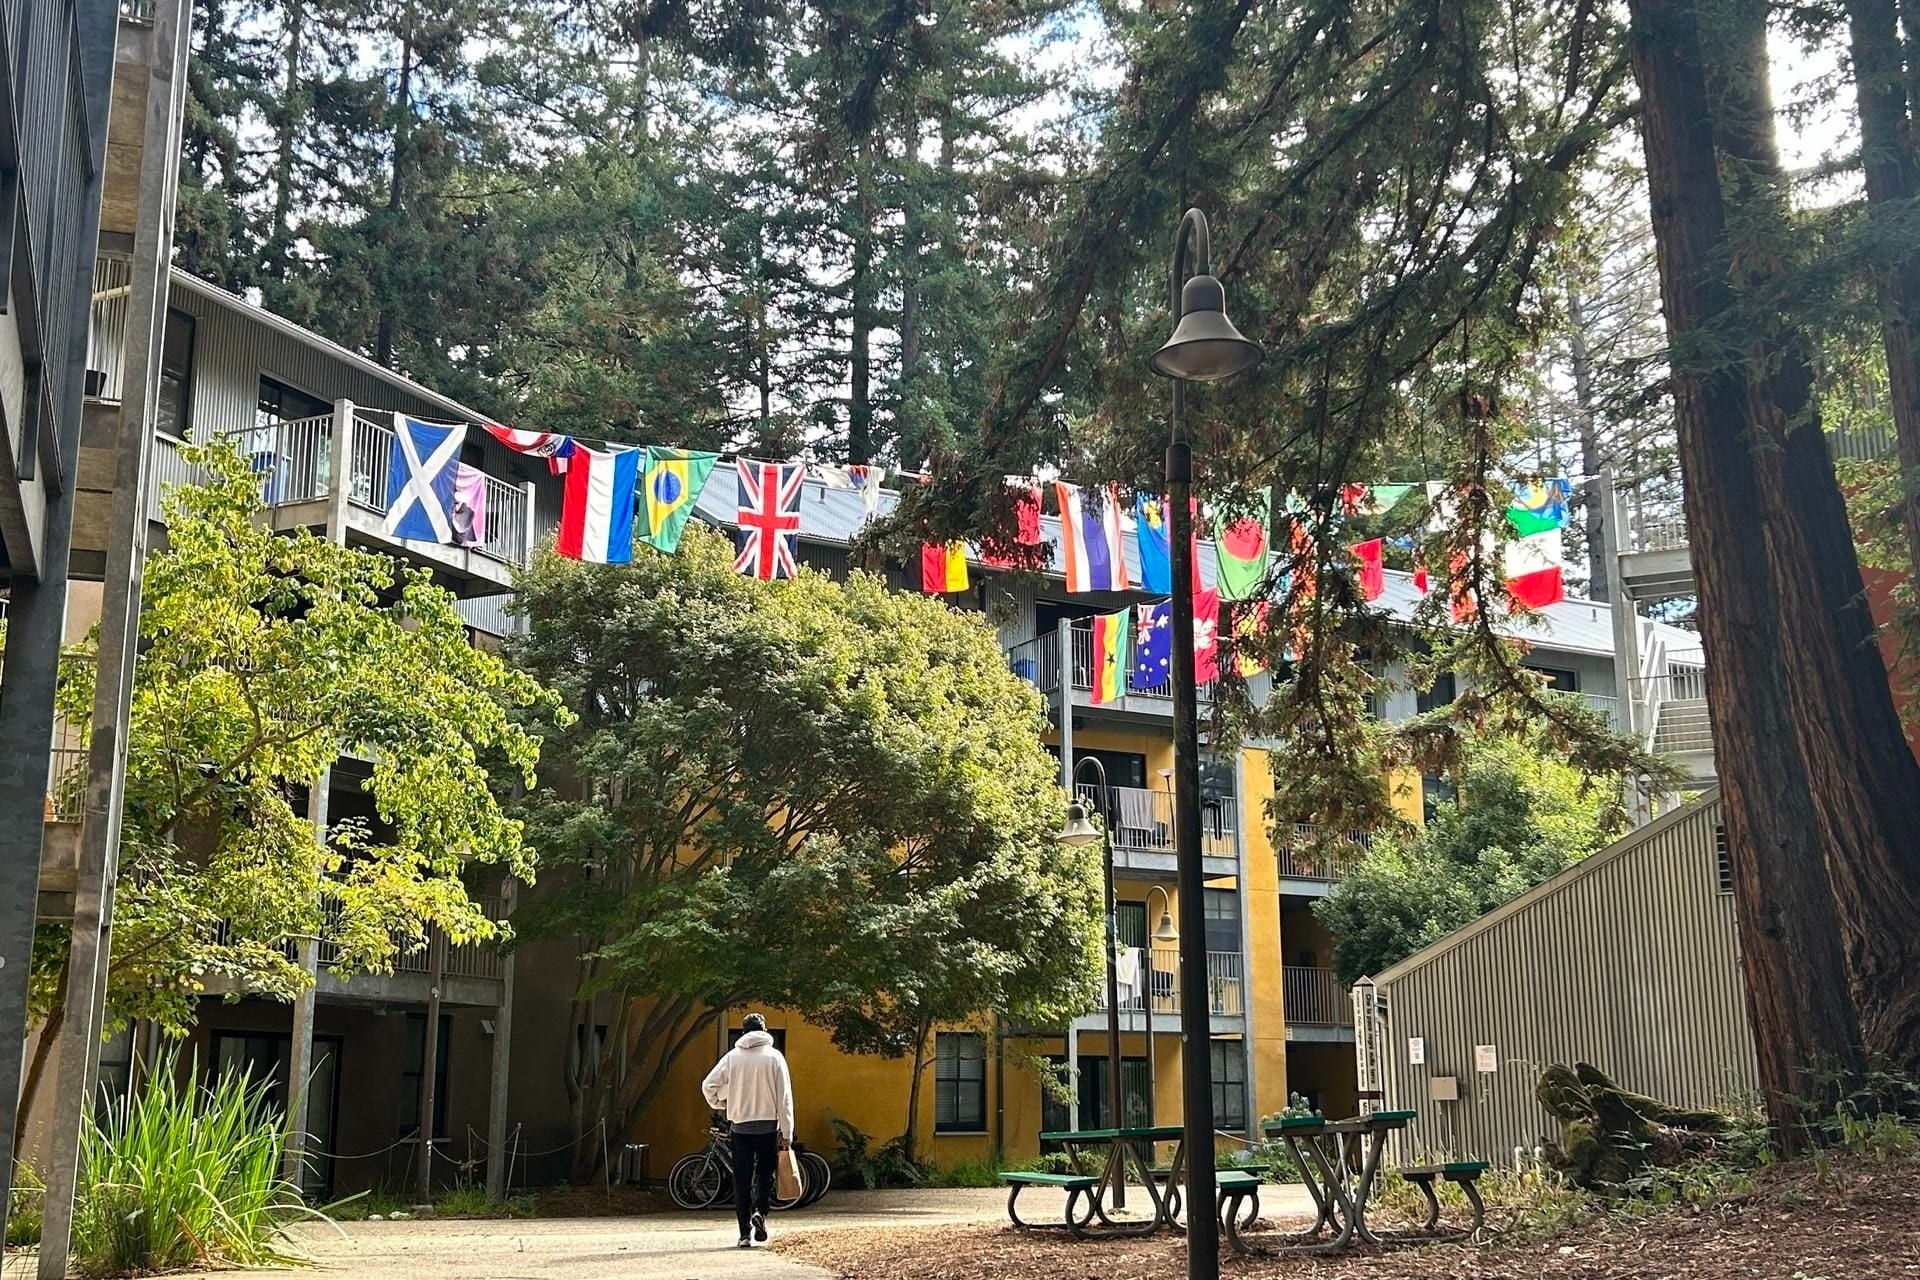 UCSC College 9 with strings of flags from various countries around the world.